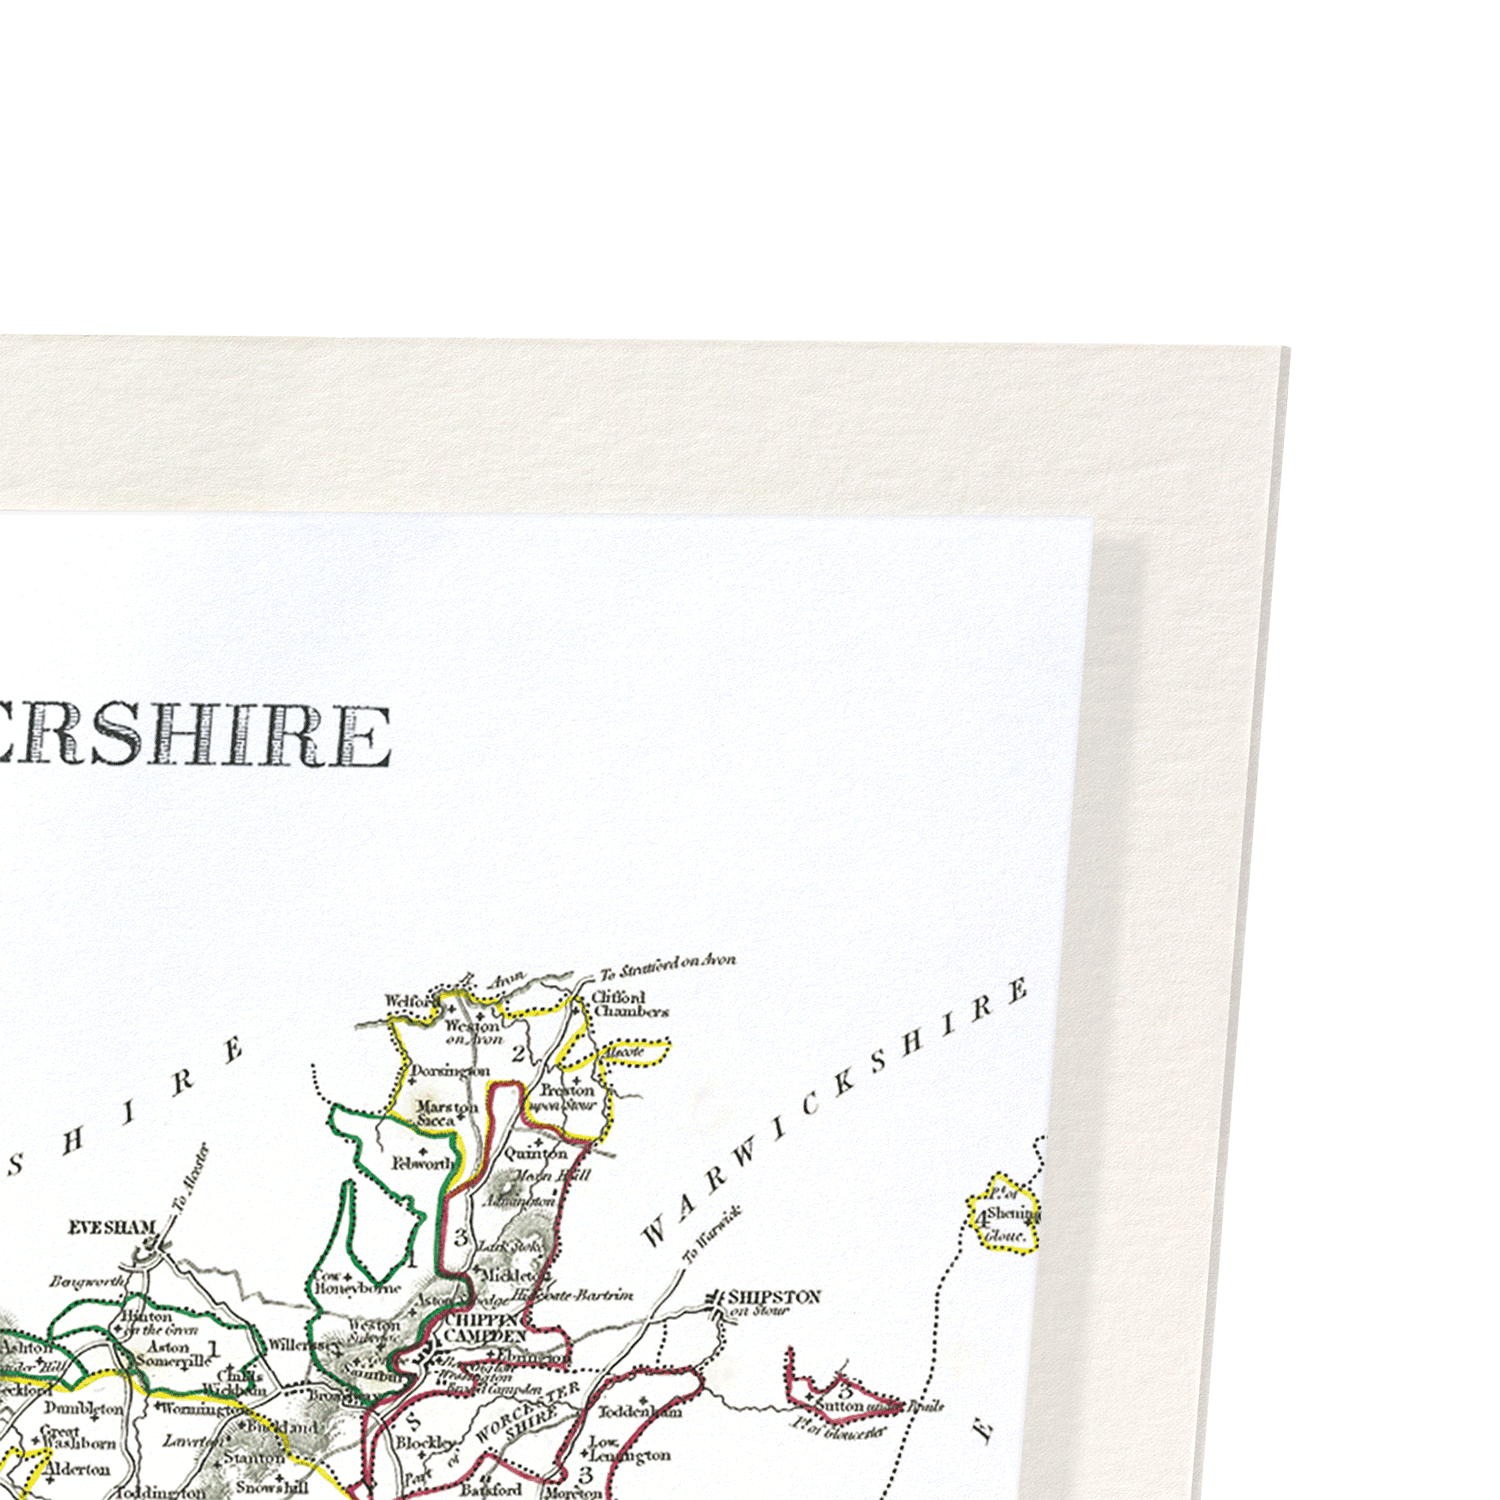 COUNTY OF GLOUCESTERSHIRE (C.1840)